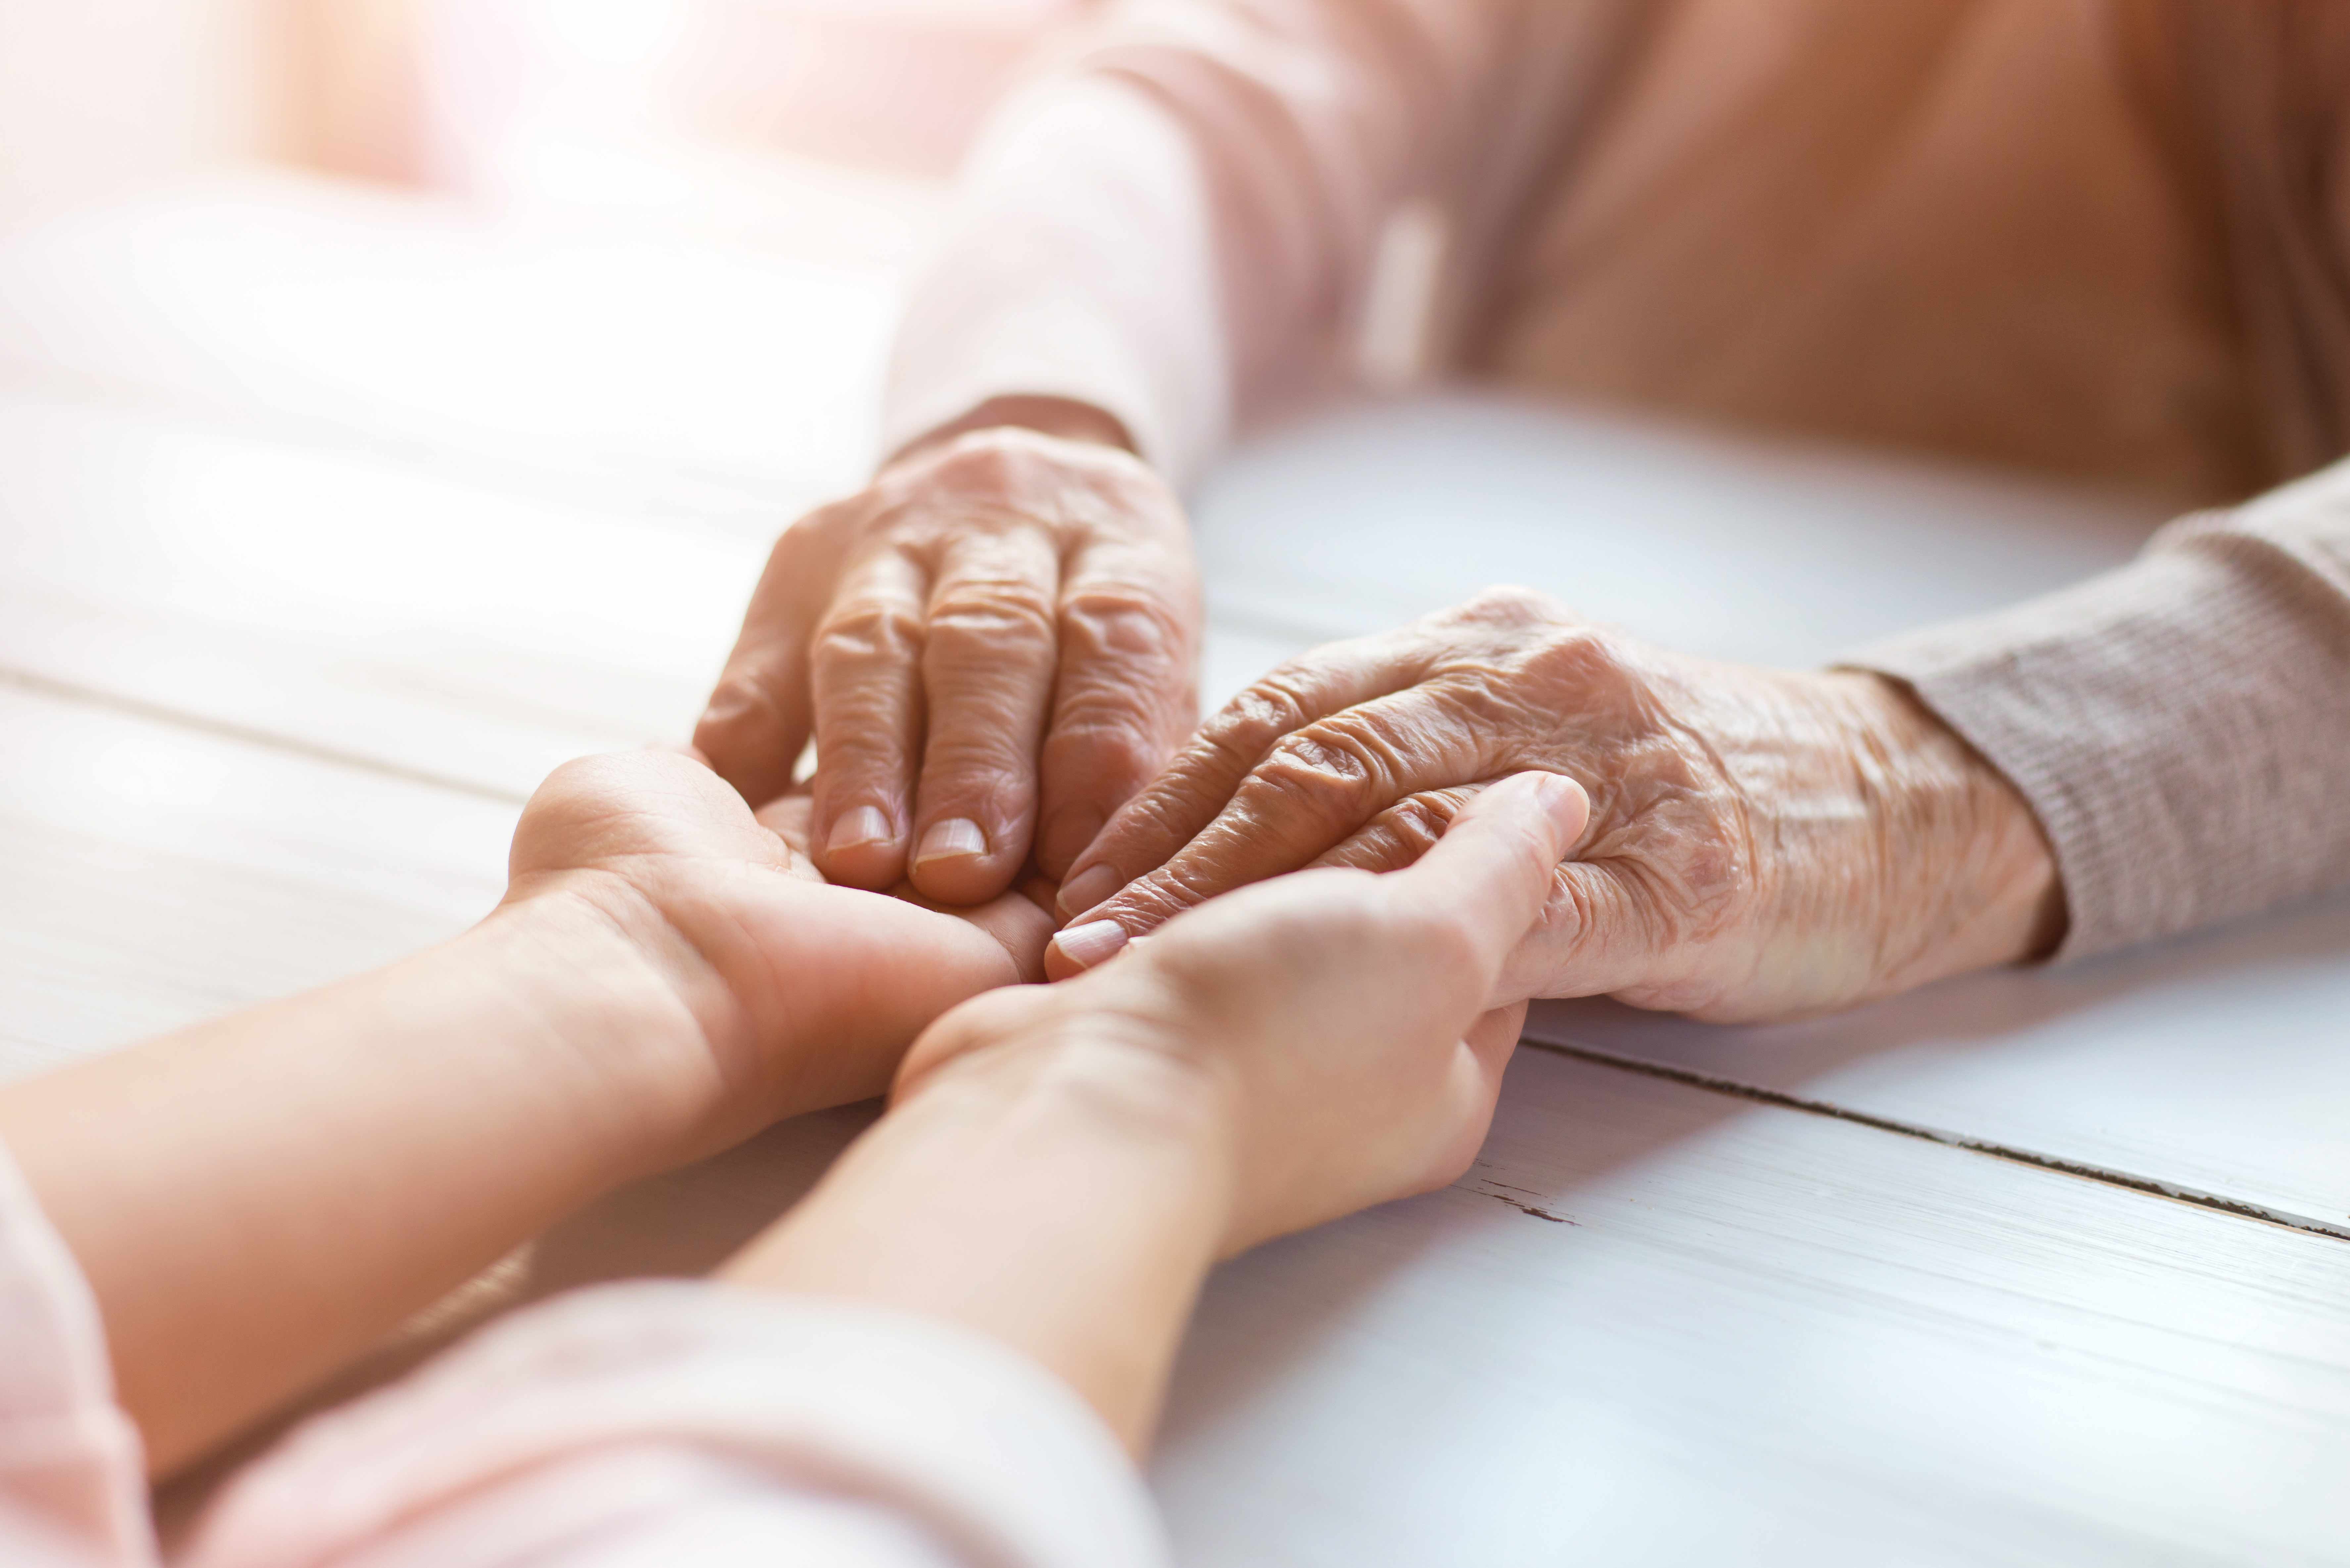 Families can fracture in dealing with arrangements for ageing parents